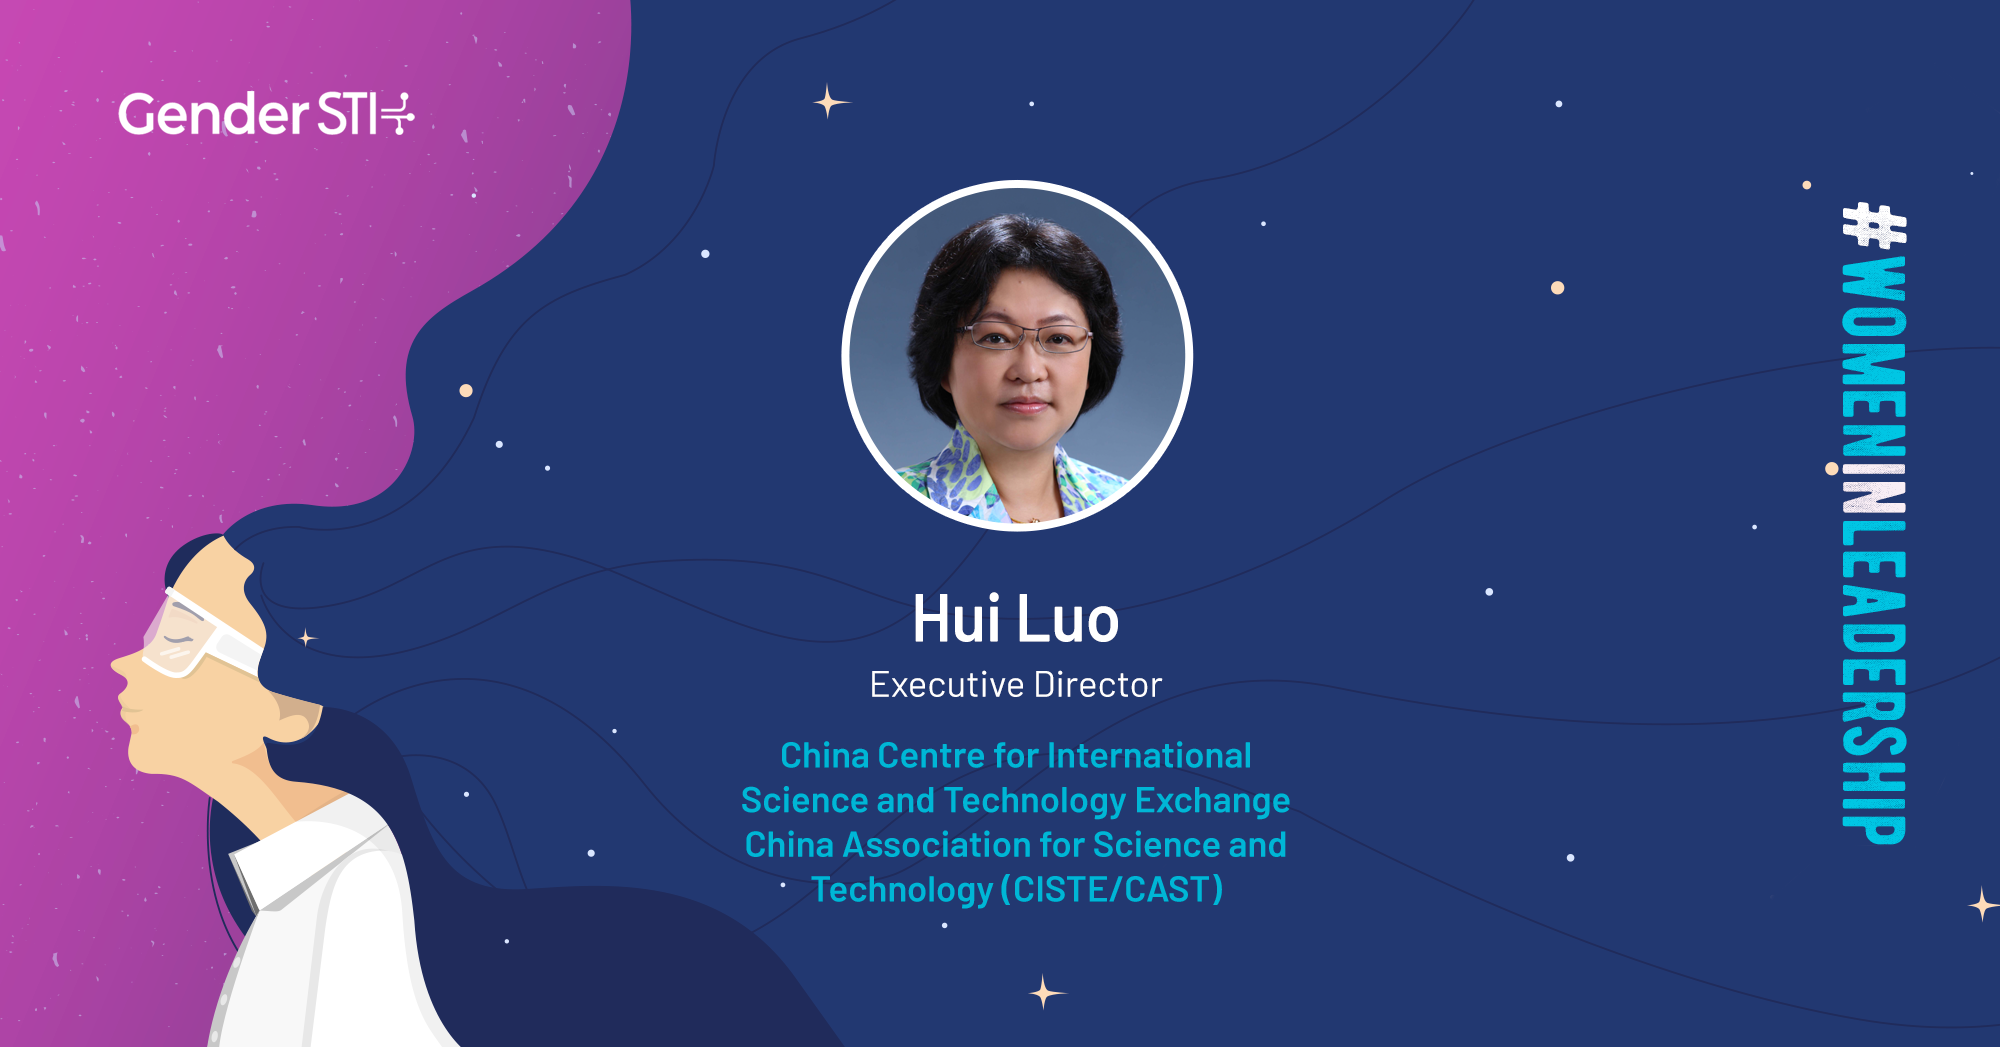 Hui Luo, Gender STI's #WomenInLeadership nominee from the China Centre for International Science and Technology Exchange.